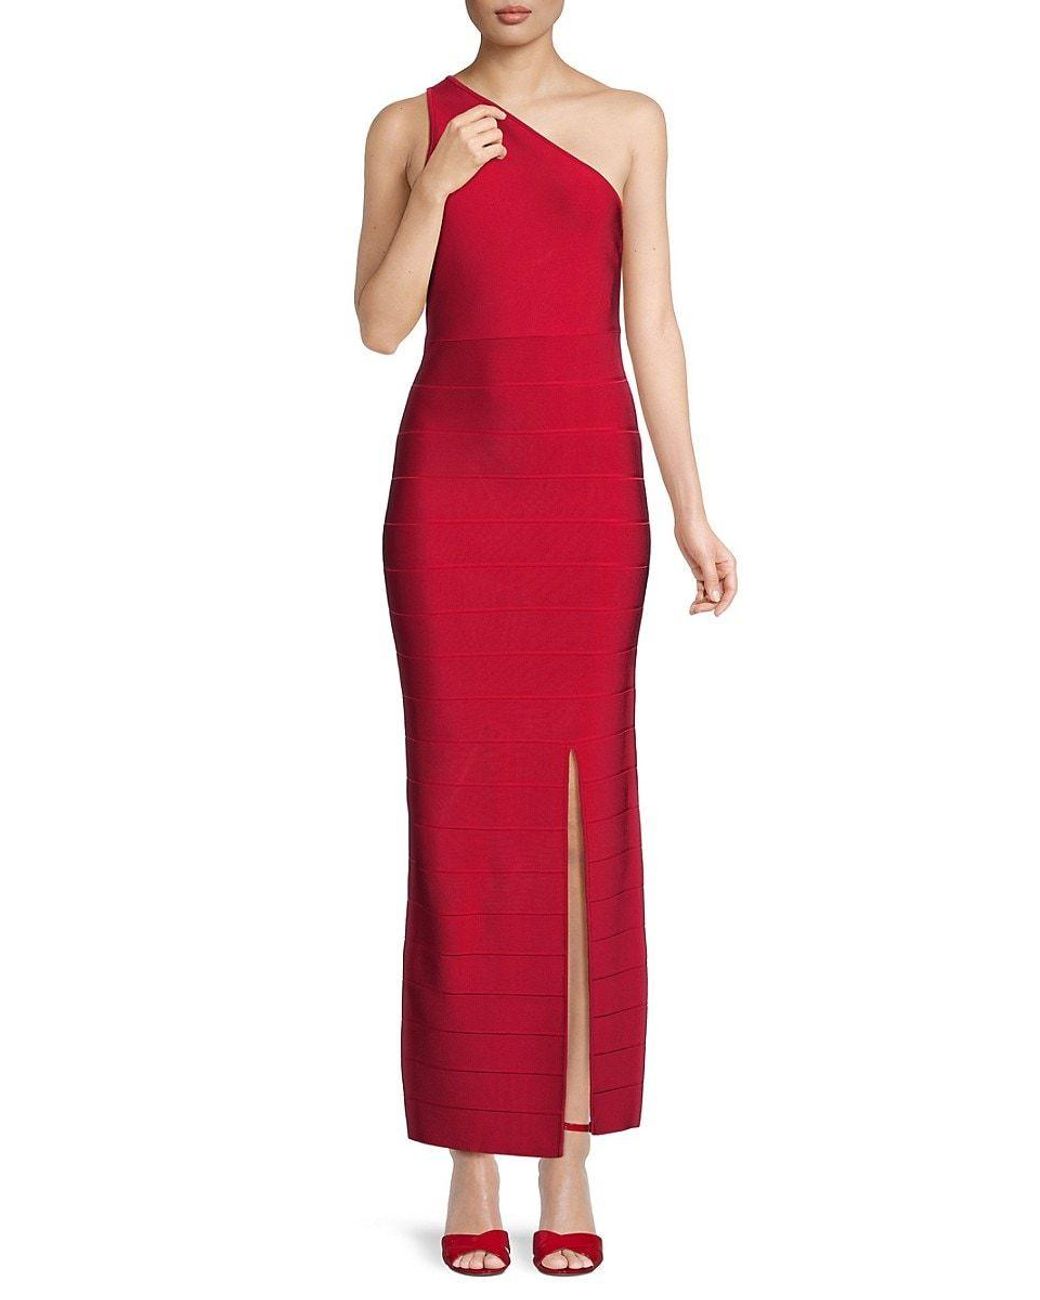 Dress by Herve leger Size 2 Red Mermaid Dress on Queenly